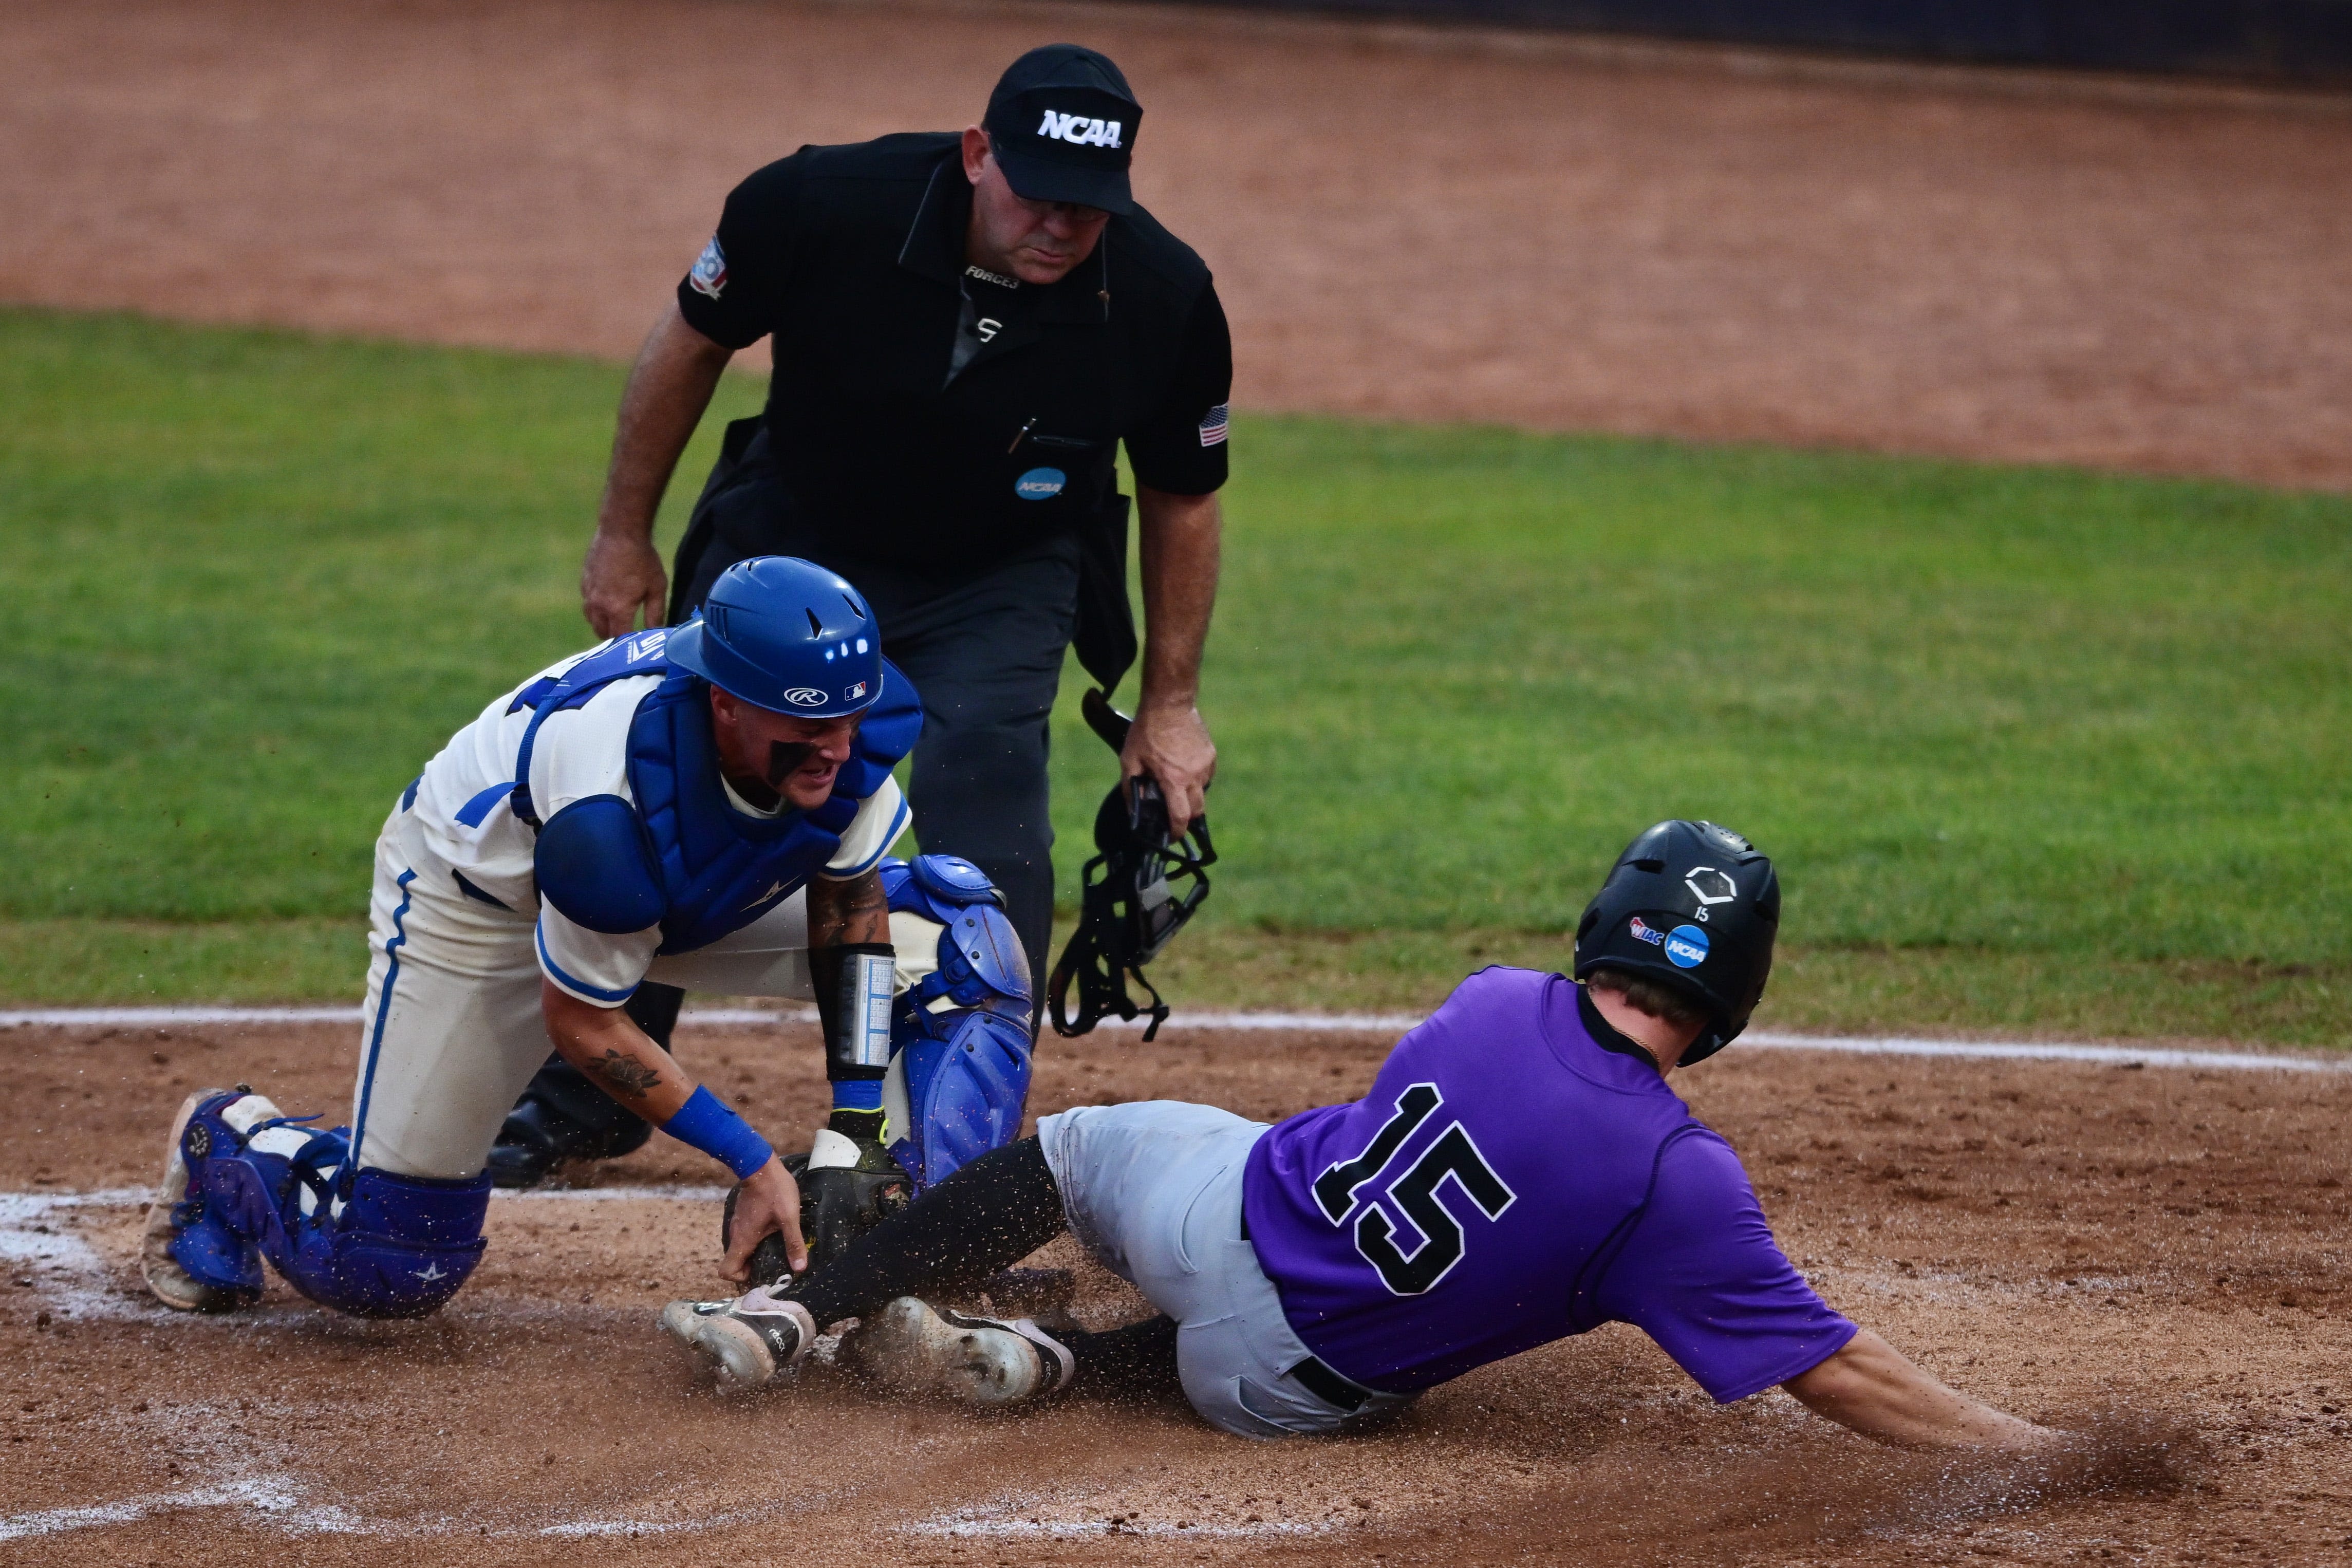 After Game 1 loss, UW-Whitewater needs to sweep Misericordia to win DIII baseball title